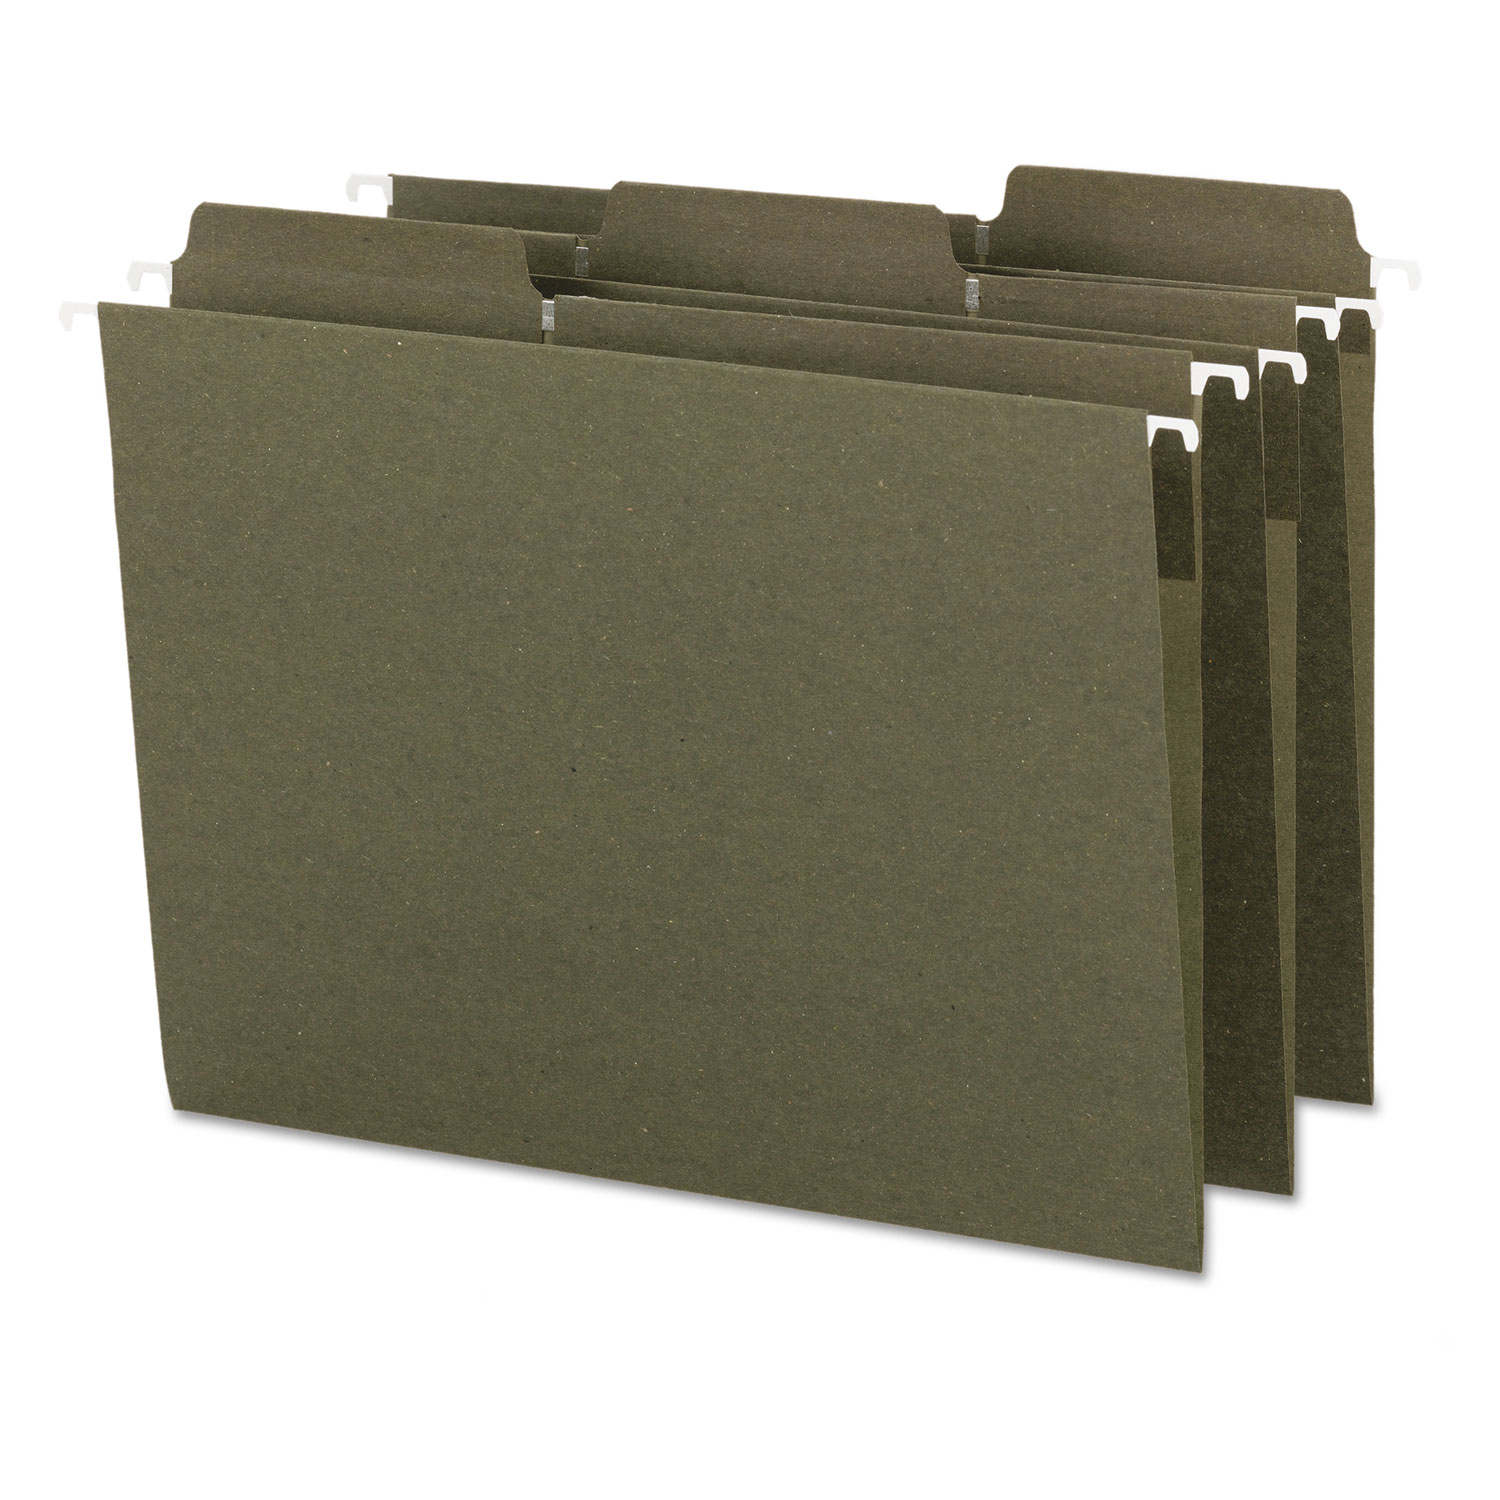 FasTab Recycled Hanging File Folders, Letter, Green, 20/Box